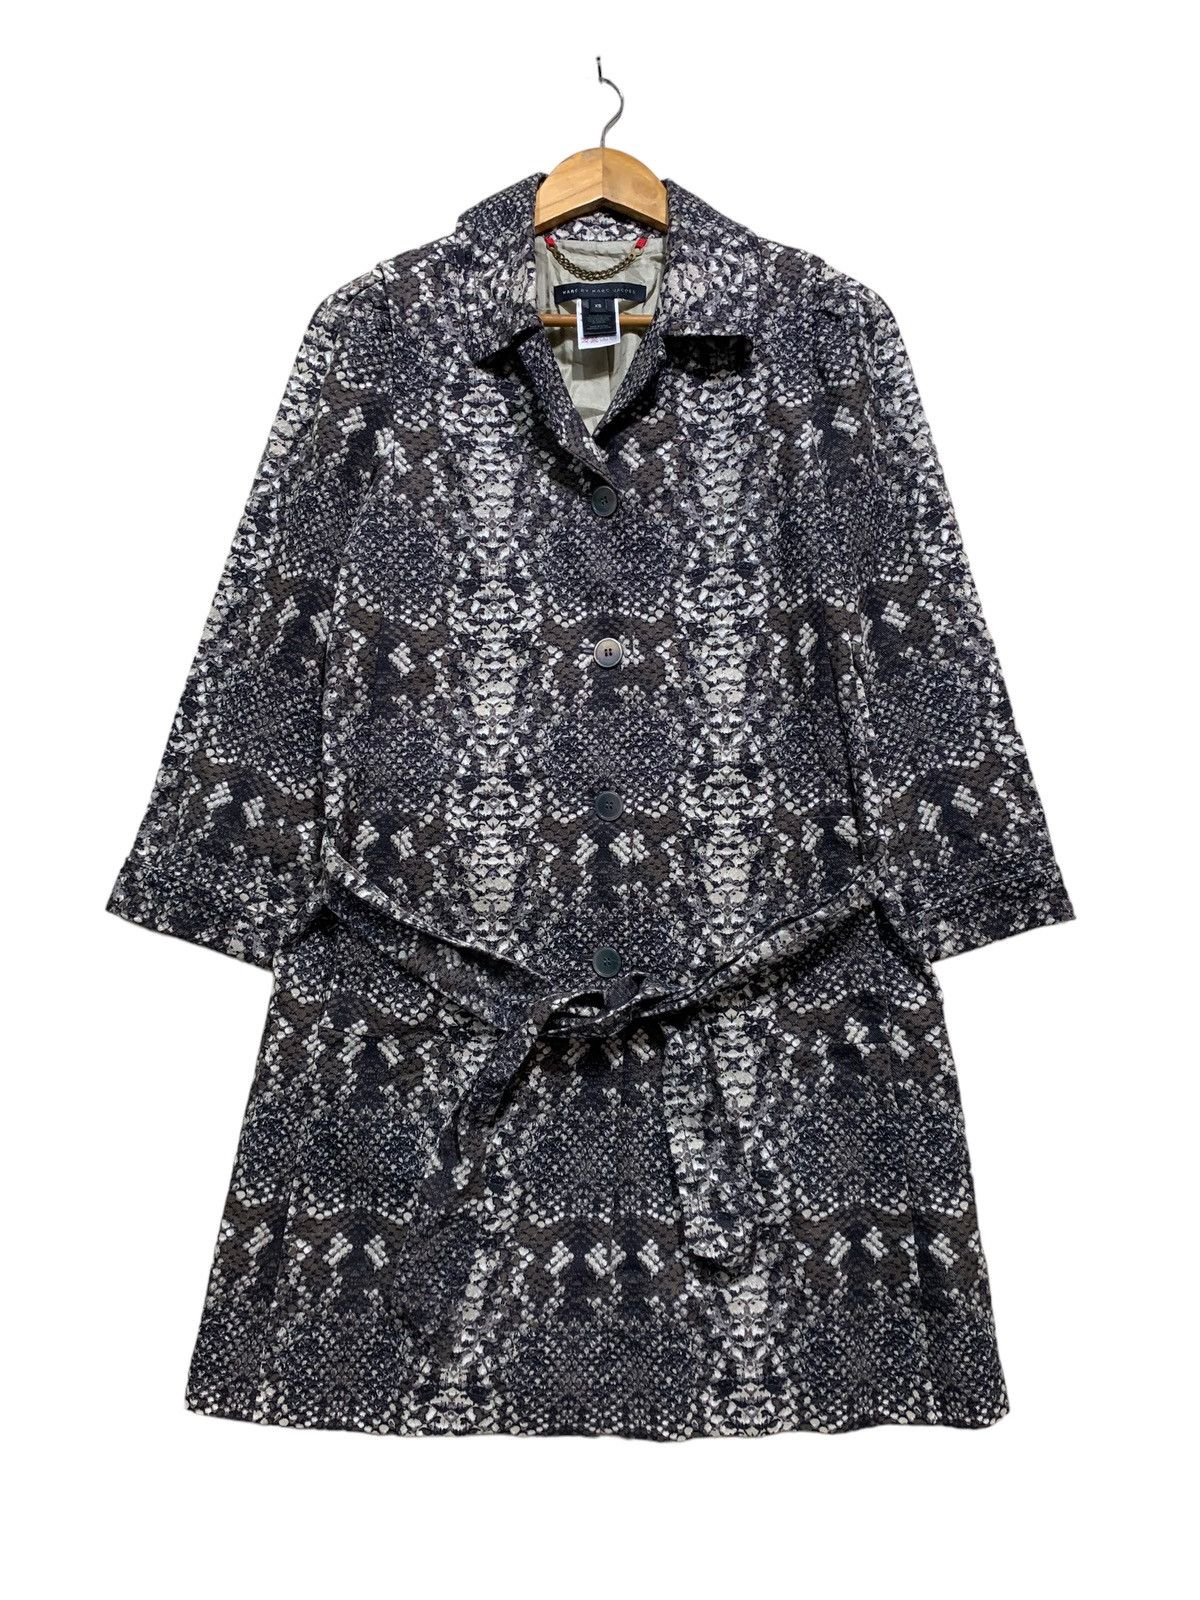 🔥MARC JACOBS SNAKESKIN PRINTED TRENCHCOATS - 1